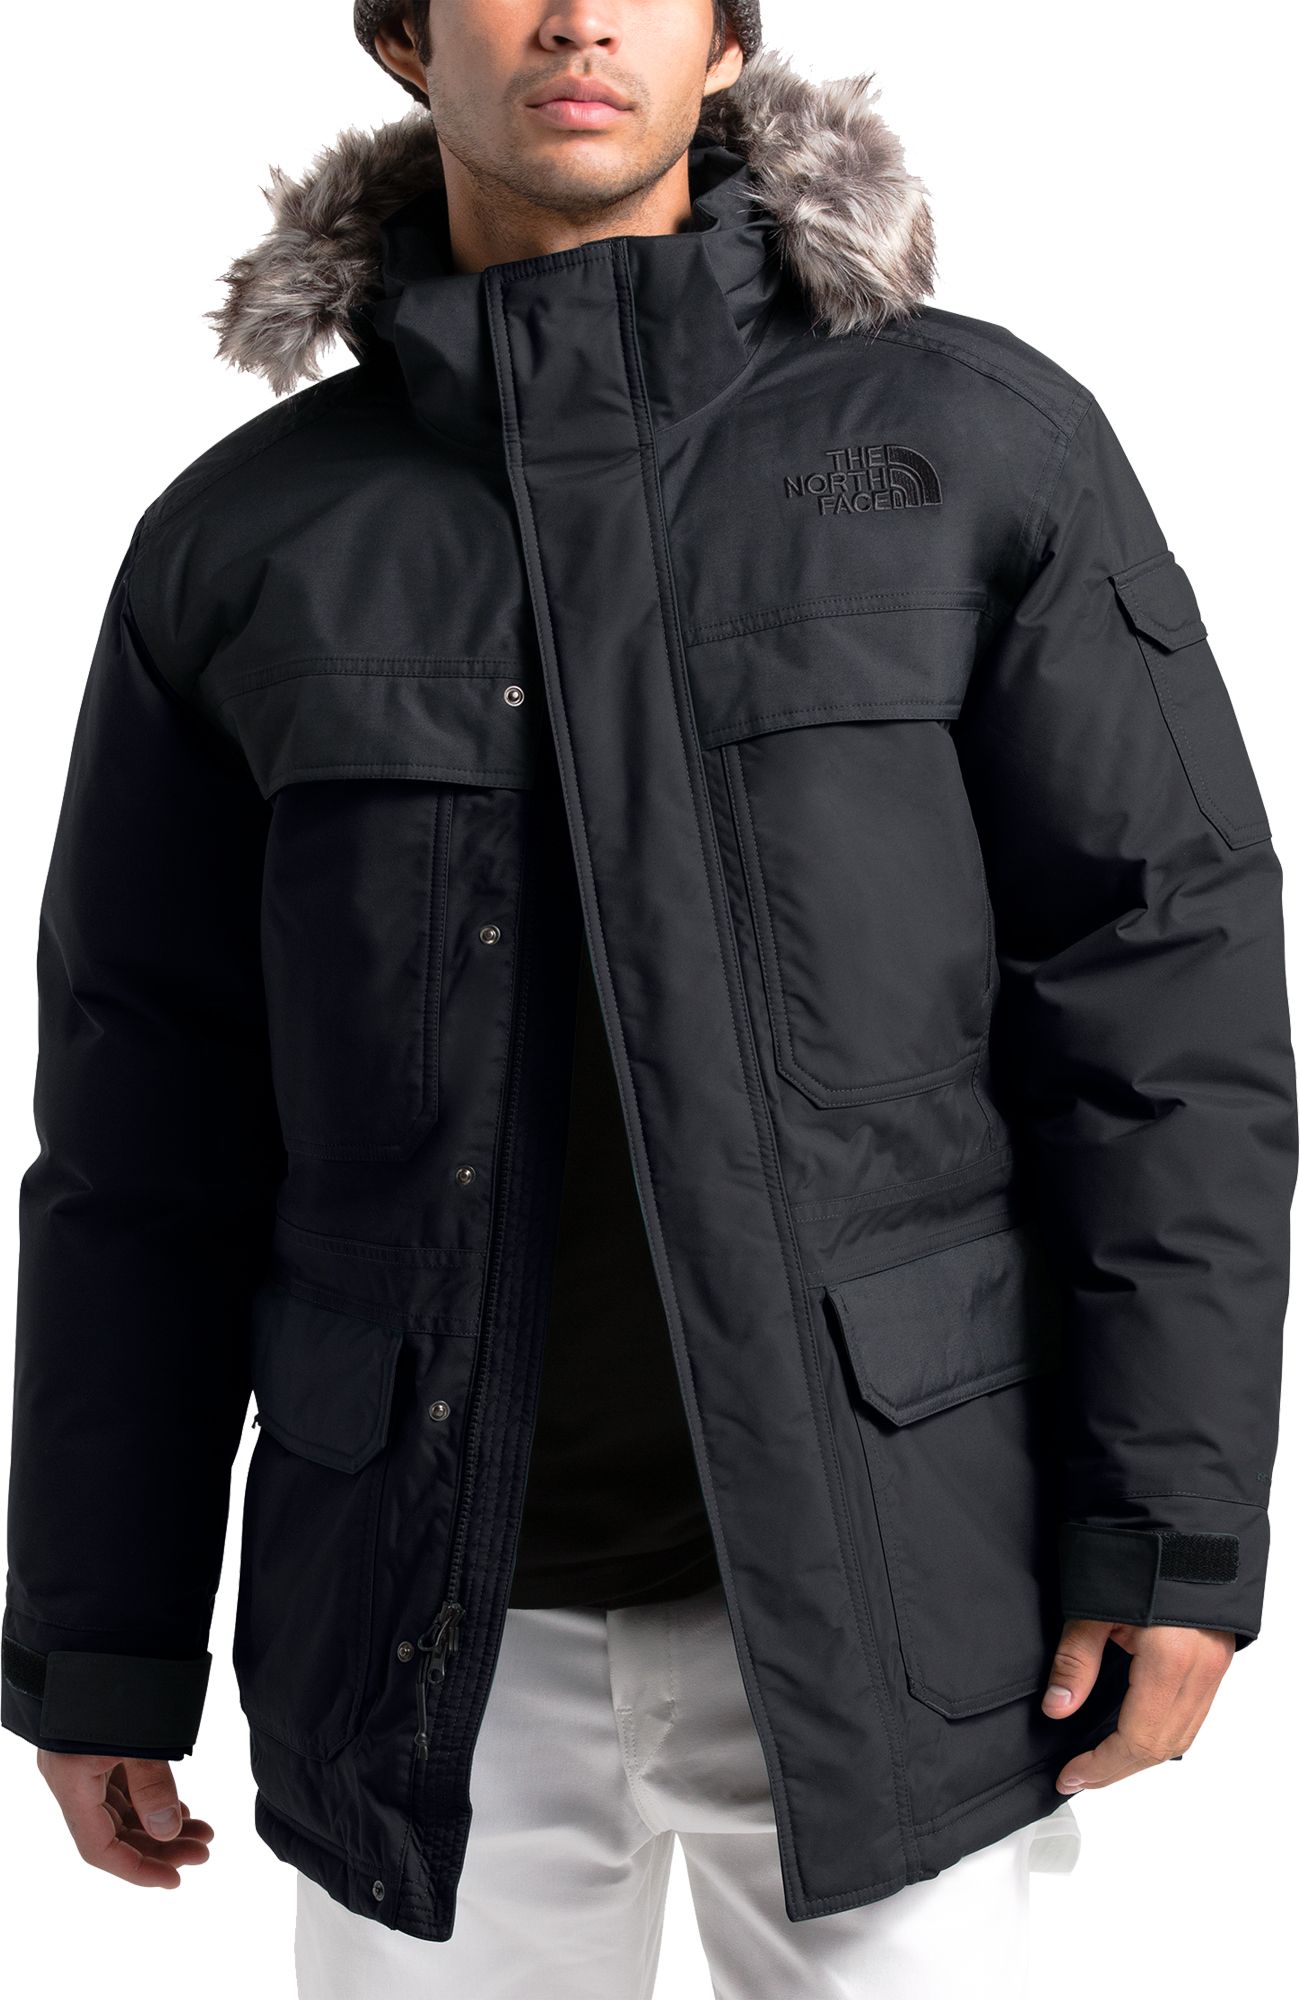 The North Face Mcmurdo Parka Iii Flash Sales, 51% OFF | www.groupgolden.com